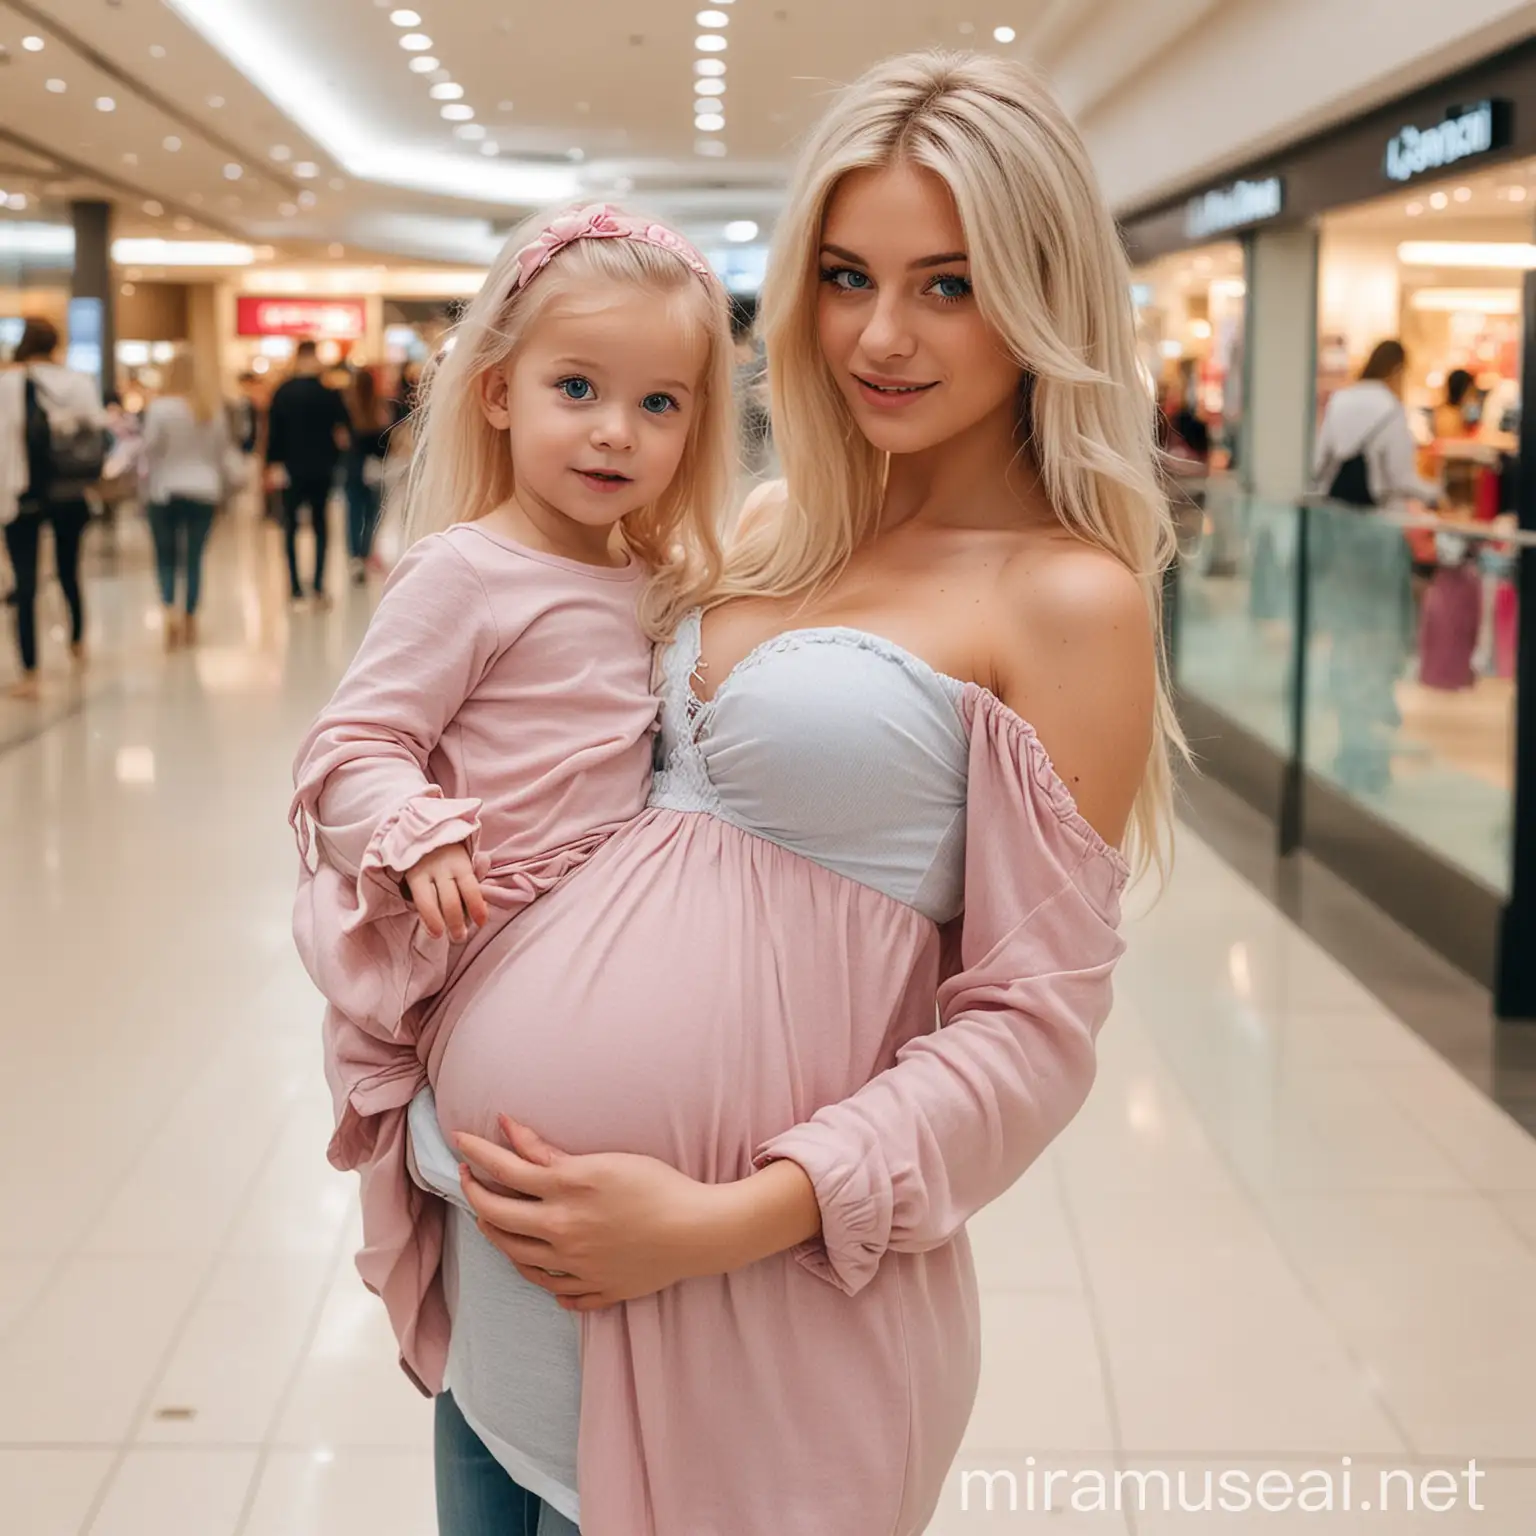 Pregnant Mother and Daughter Shopping in Modern Mall